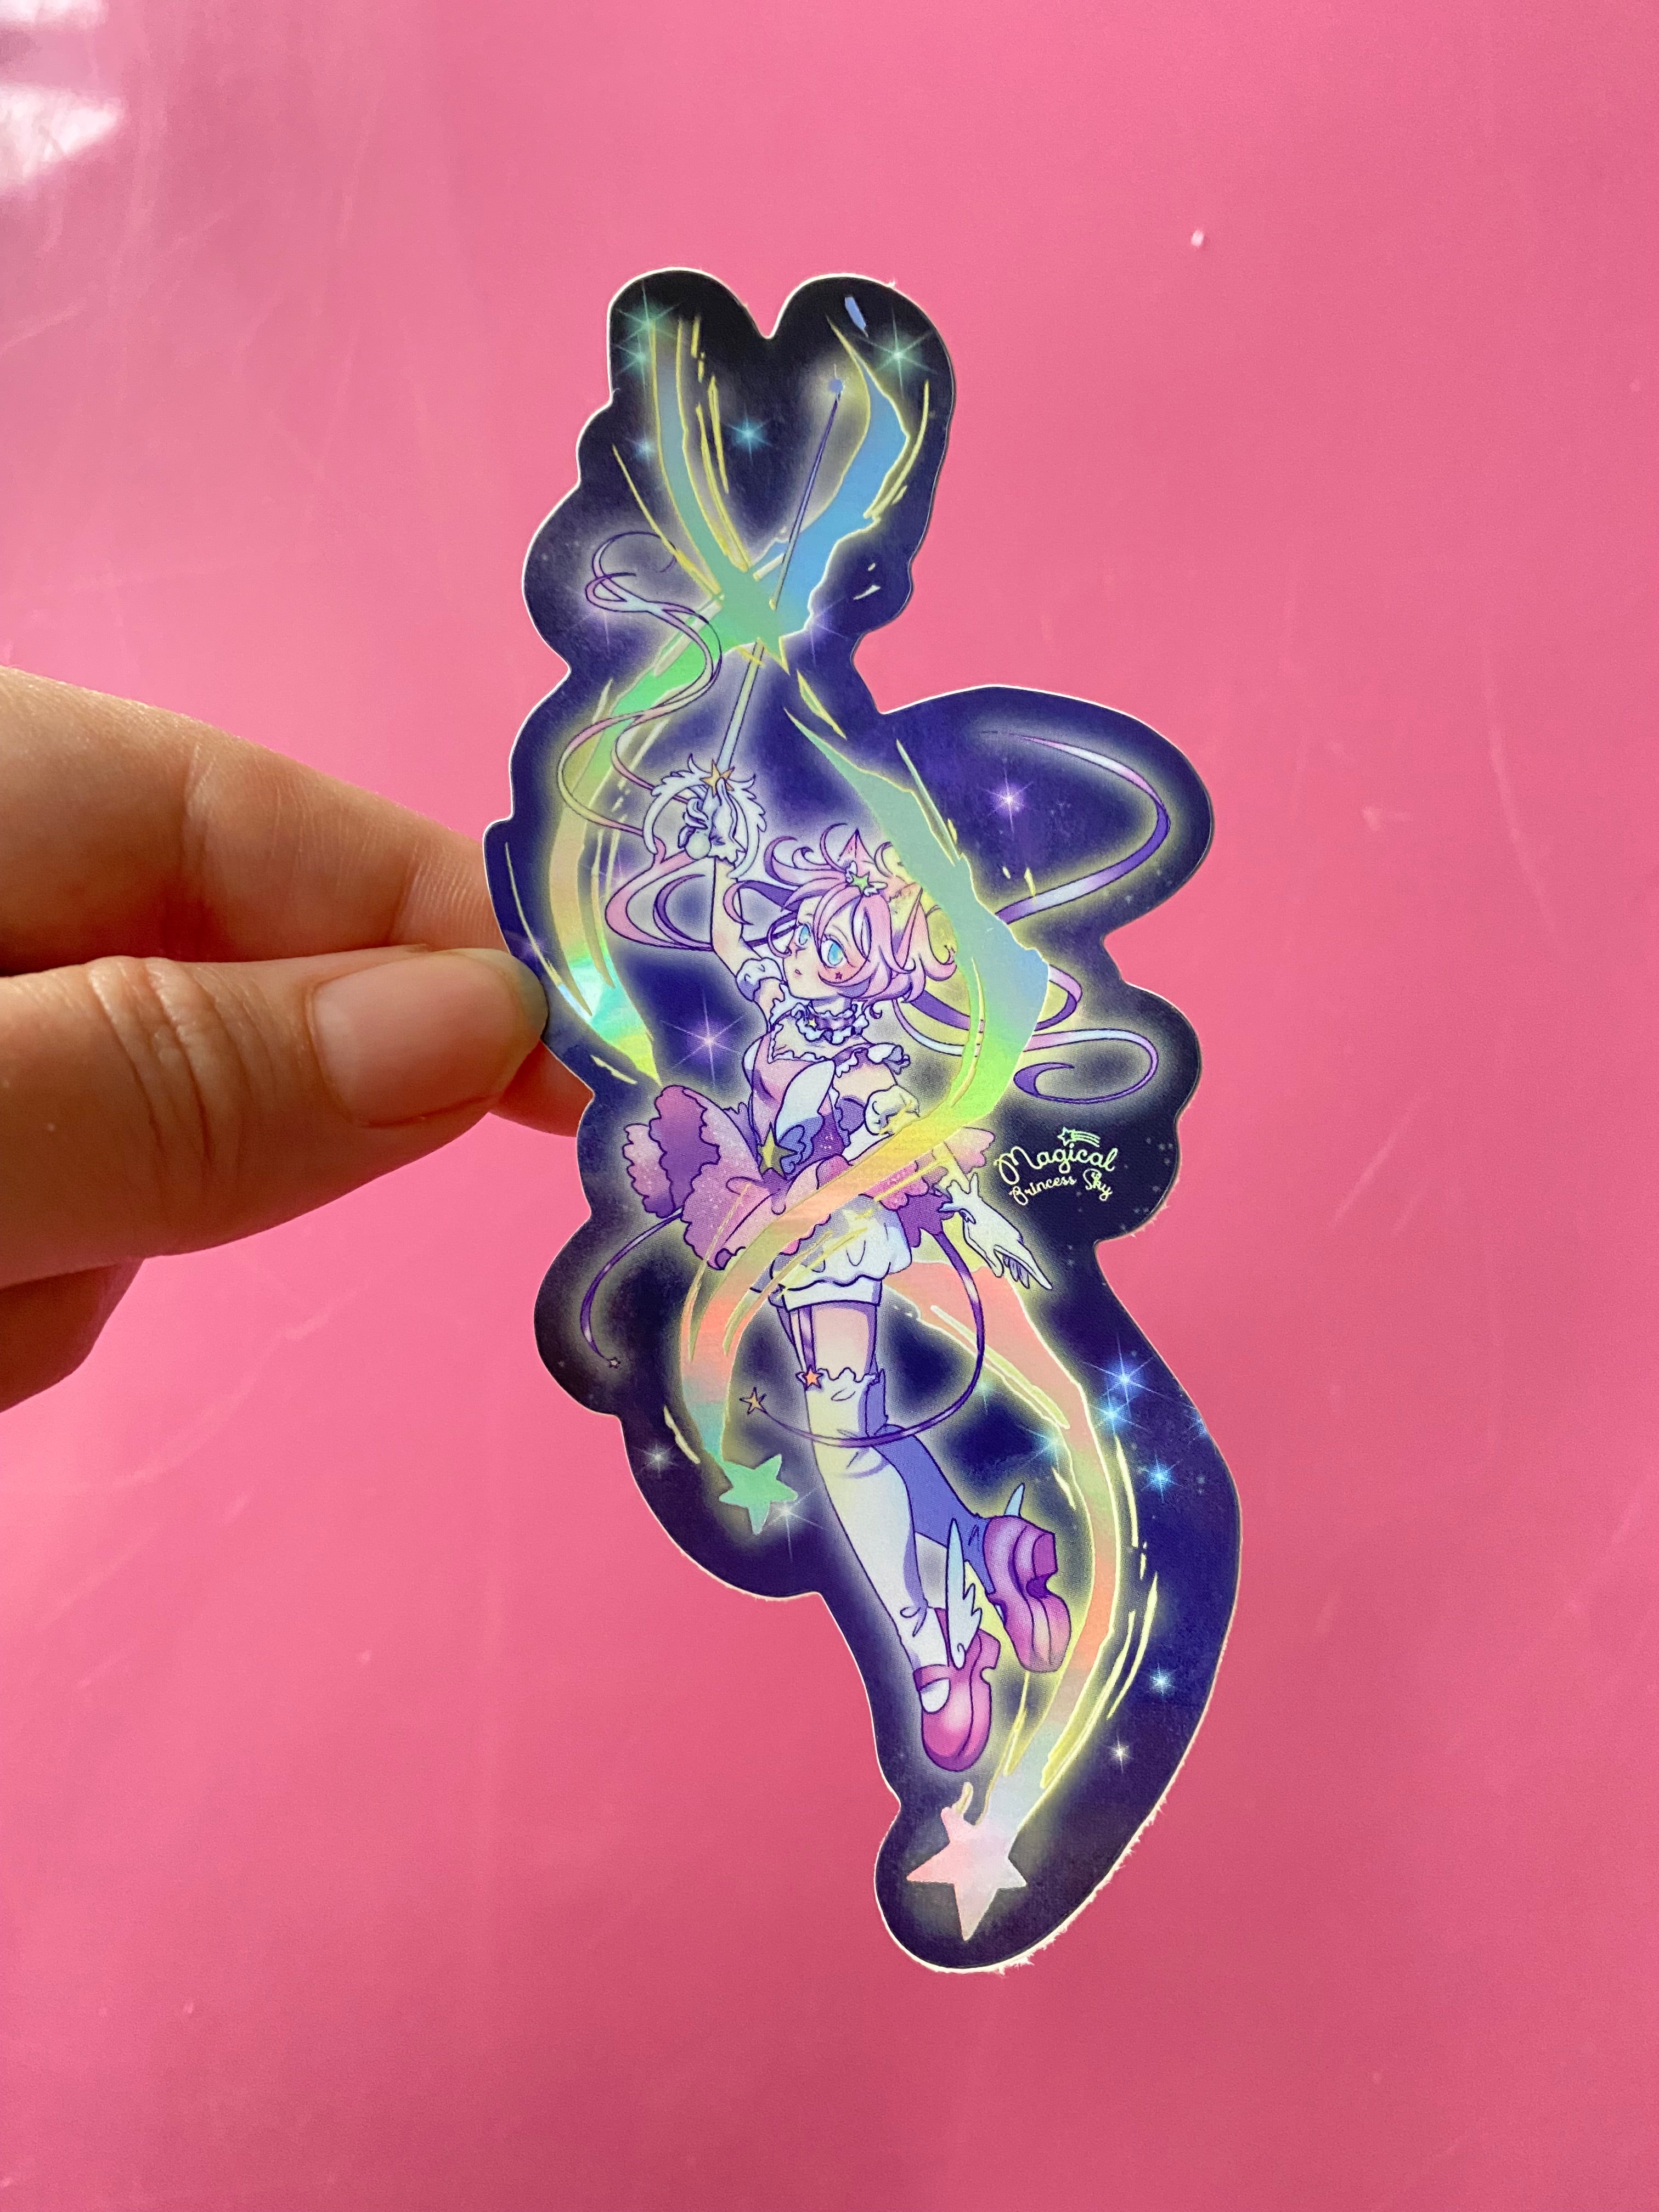 Magical Princess Sky transformation shooting stars vinyl holographic sticker 5 x 2.5 inches